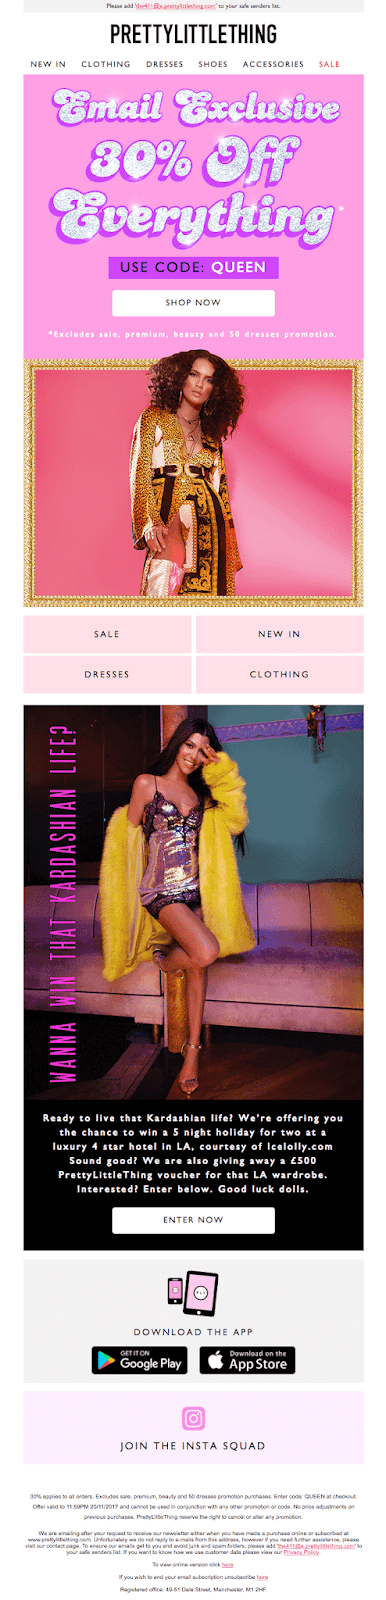 theprettylittlething-email-campaign